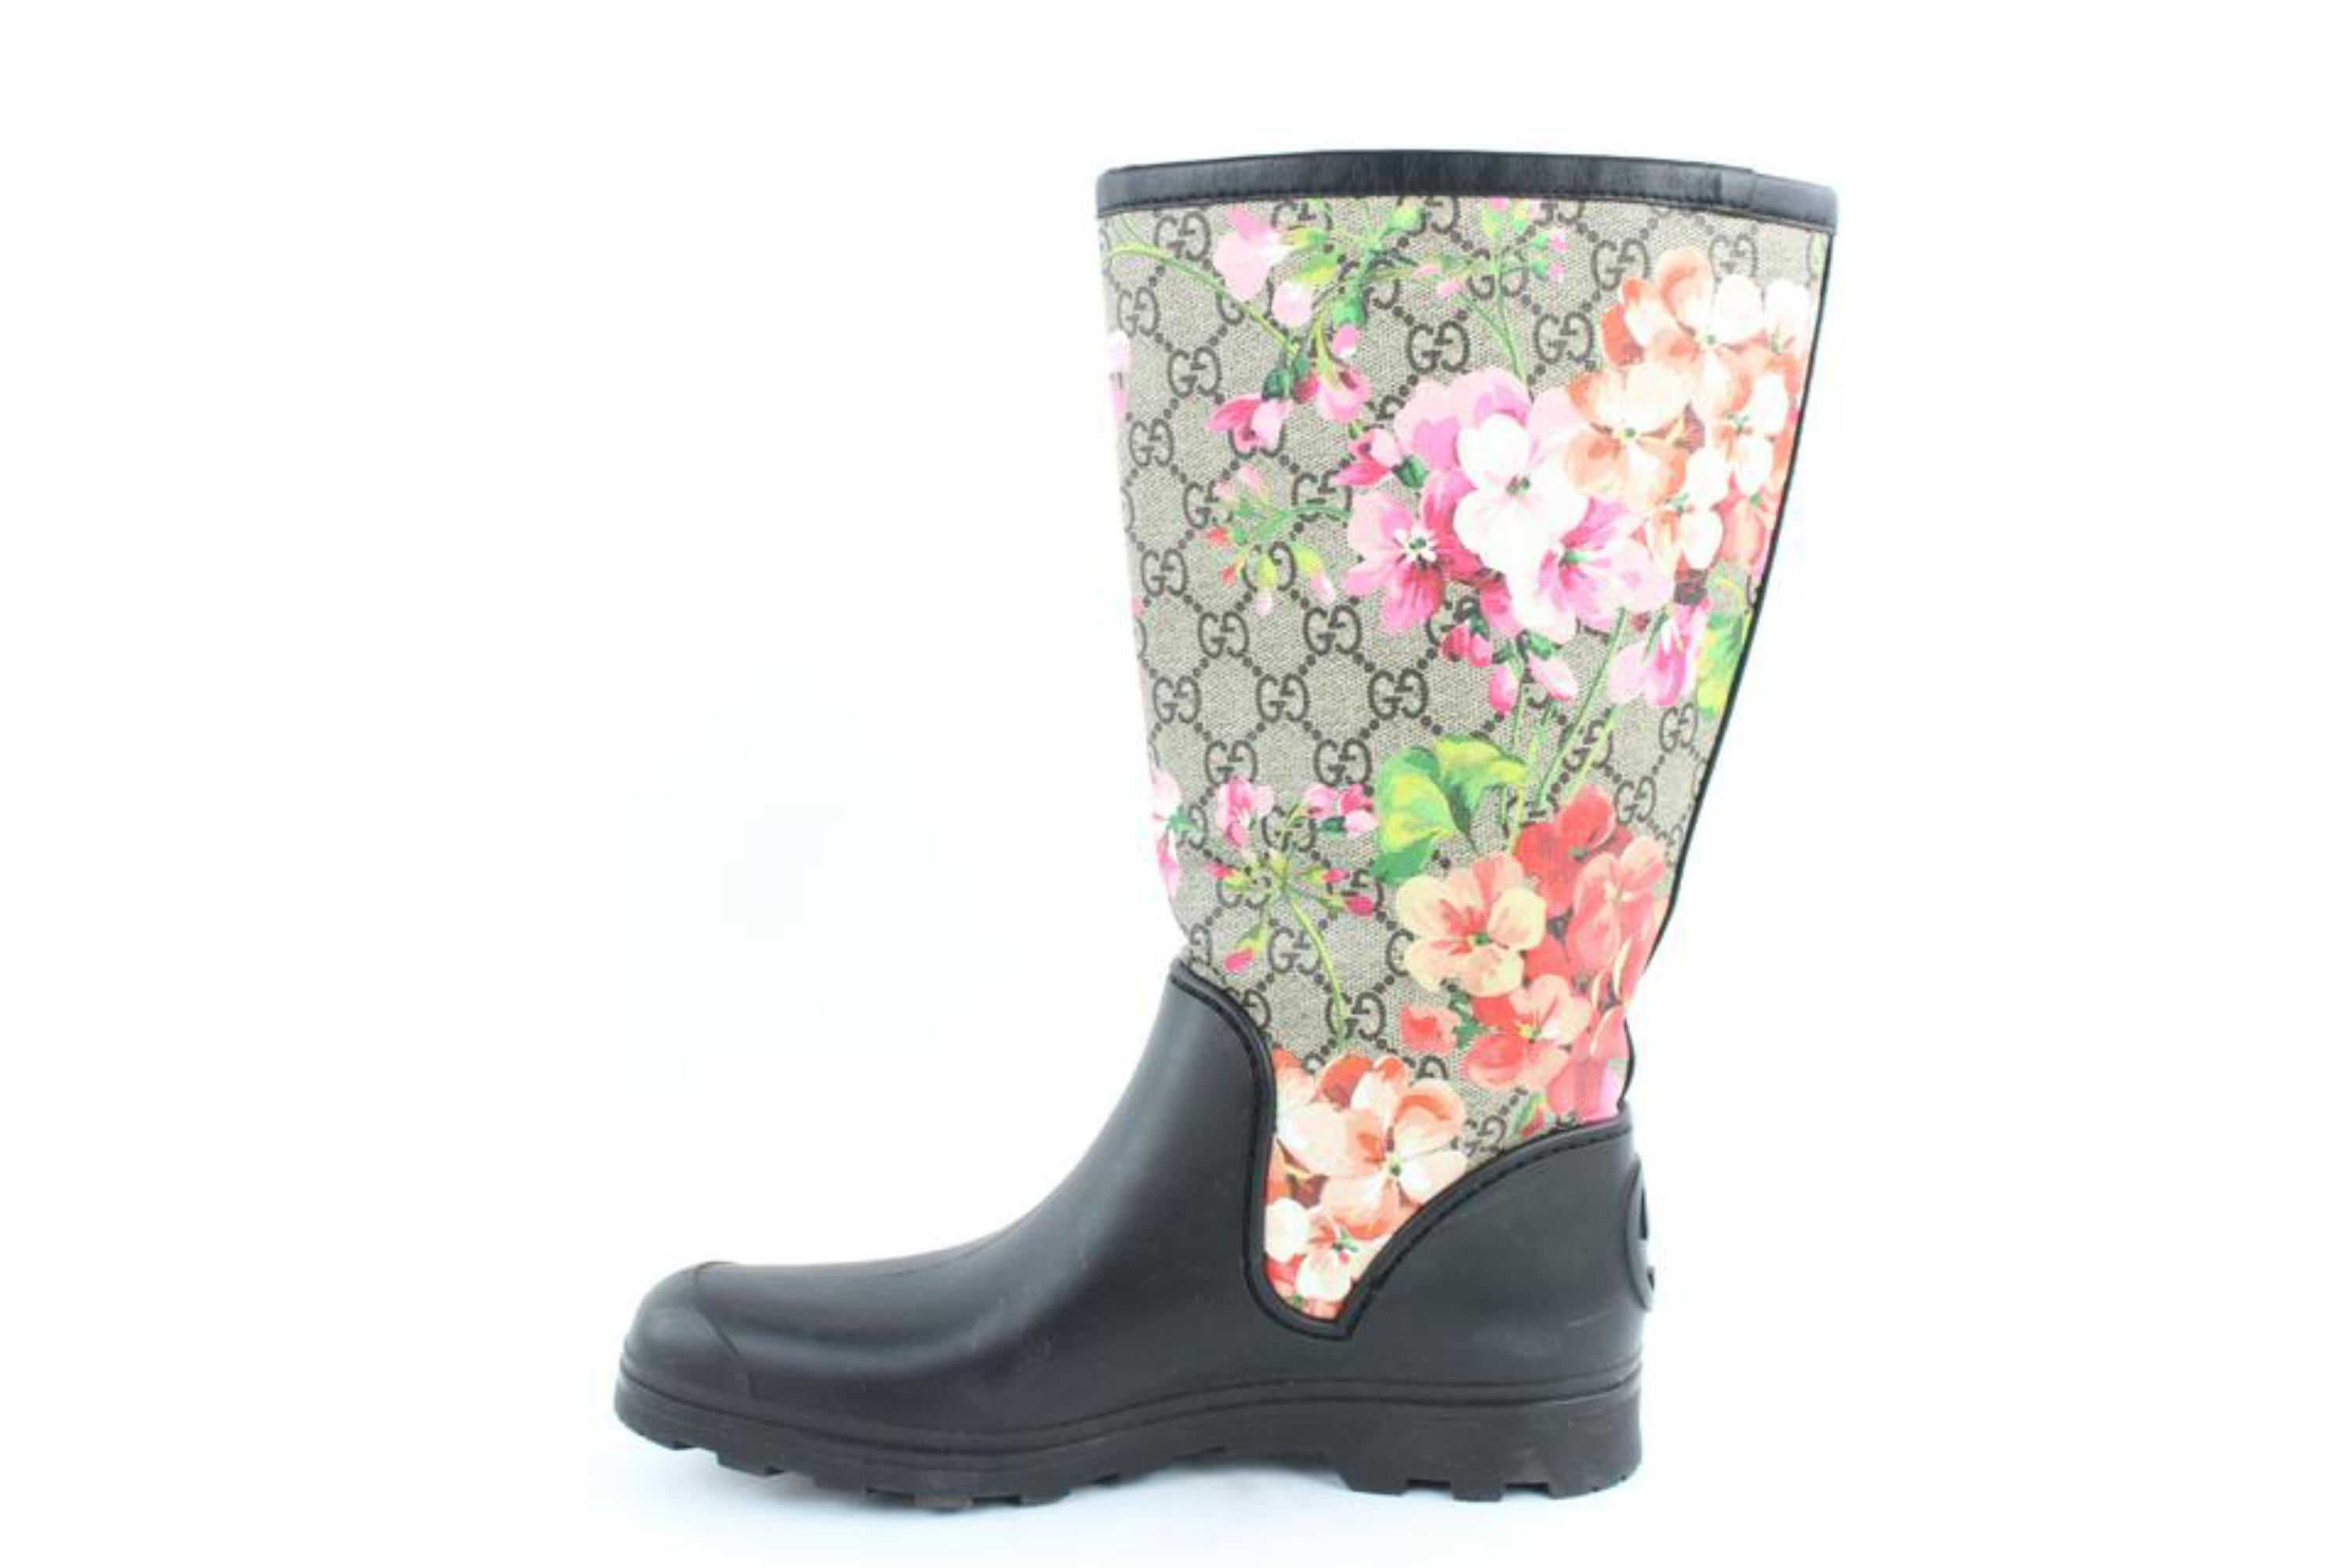 Gucci Black Limited Supreme Prato Gg Blooms Rain Boots/Booties 24684511 For Sale 5